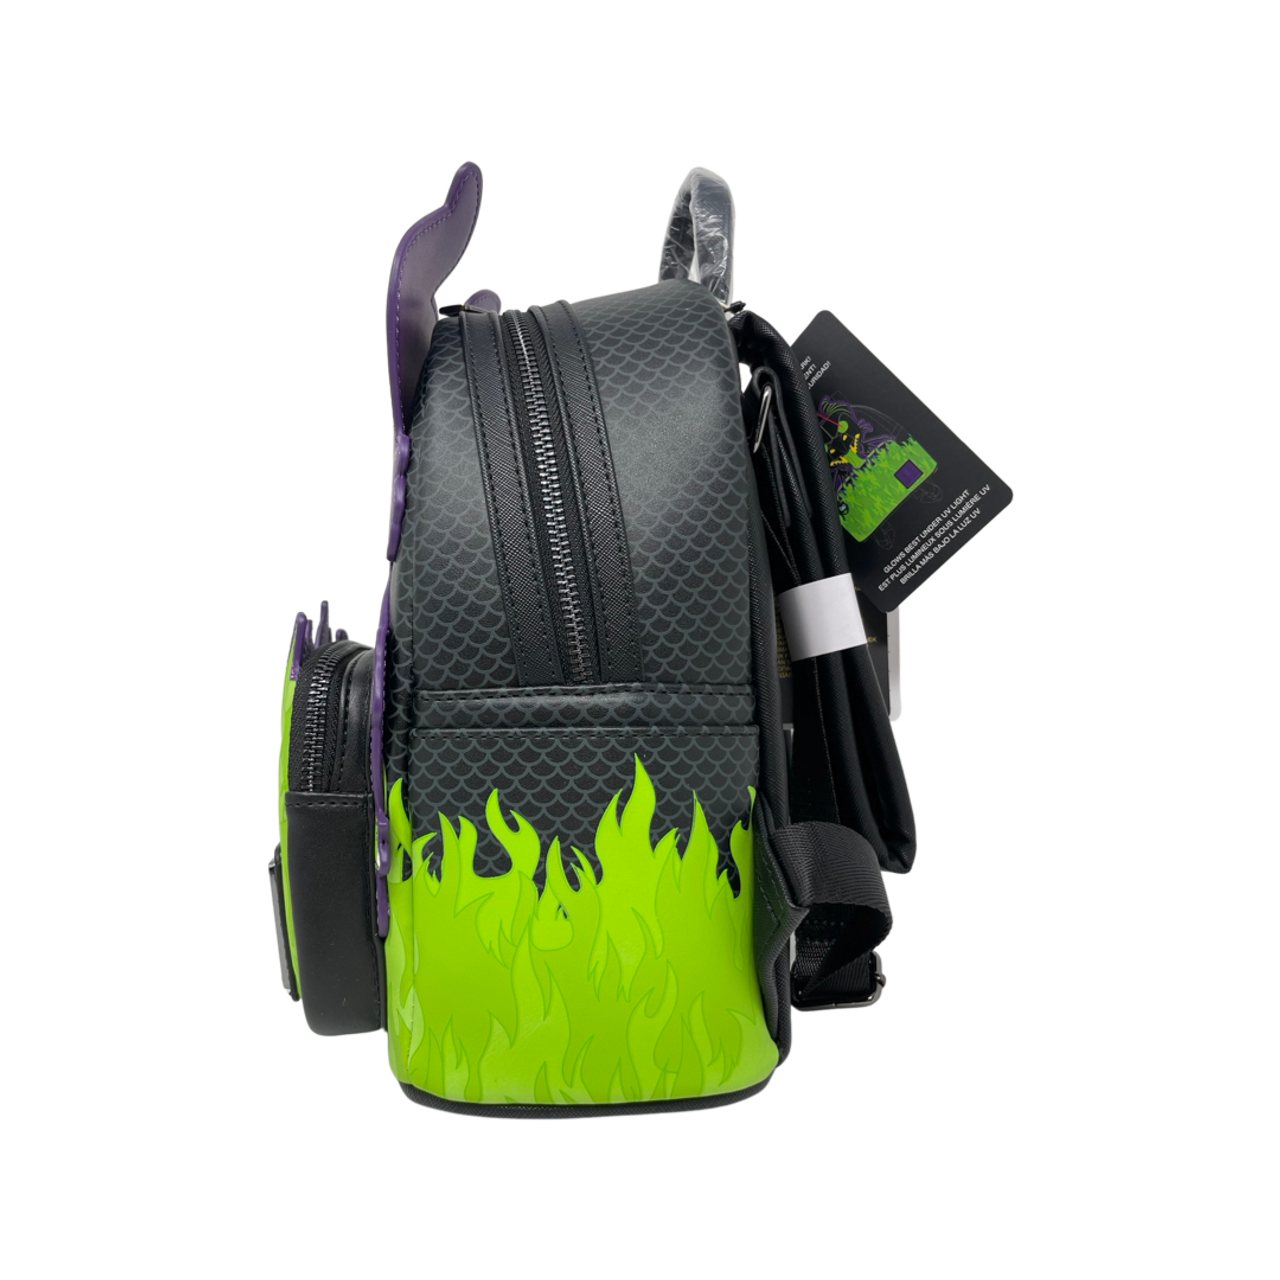 Loungefly Maleficent Dragon with Glow in the Dark Flames Mini Backpack NWT